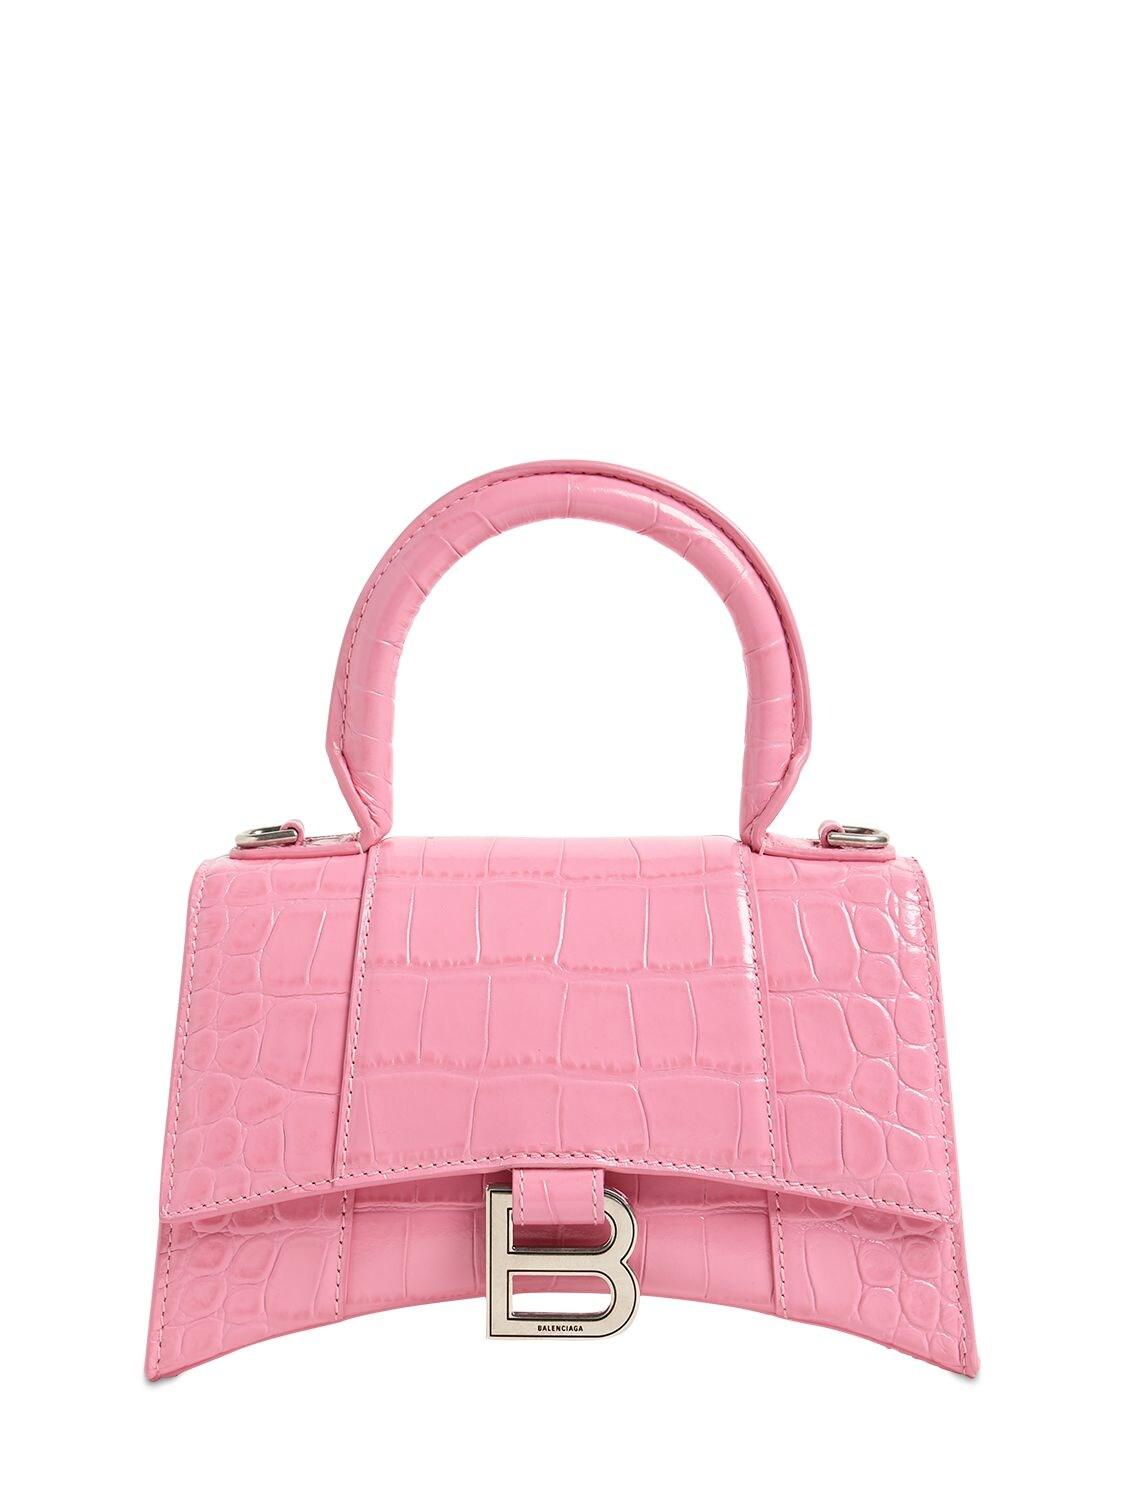 Balenciaga Xs Hourglass Croc Embossed Leather Bag in Pink - Lyst